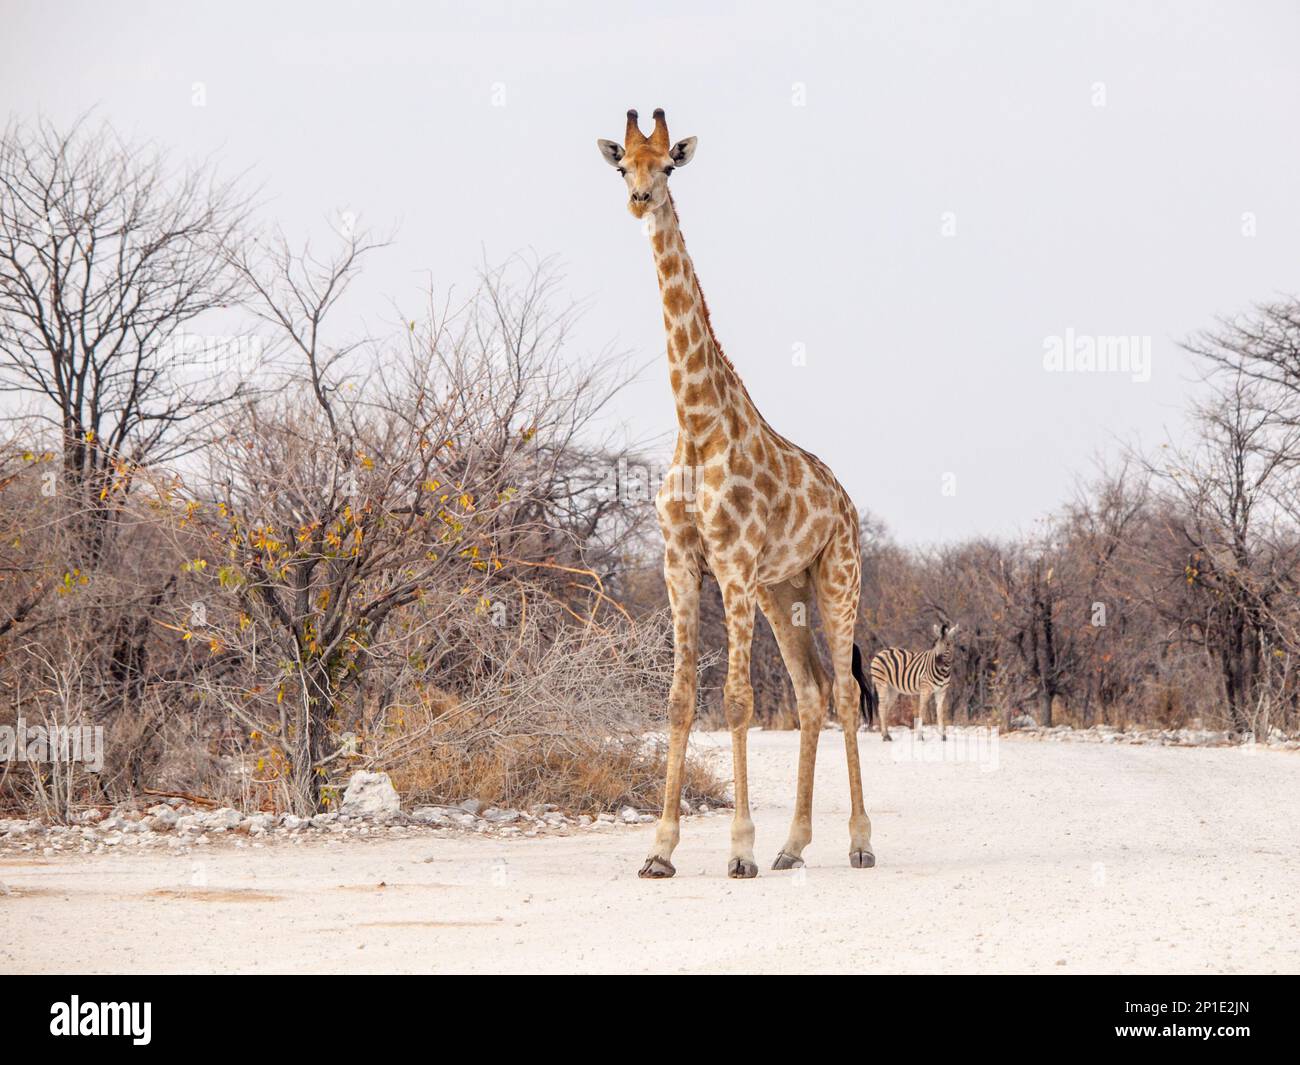 Young giraffe standing on the dusty road, Etosha National Park, Namibia, Africa. Stock Photo